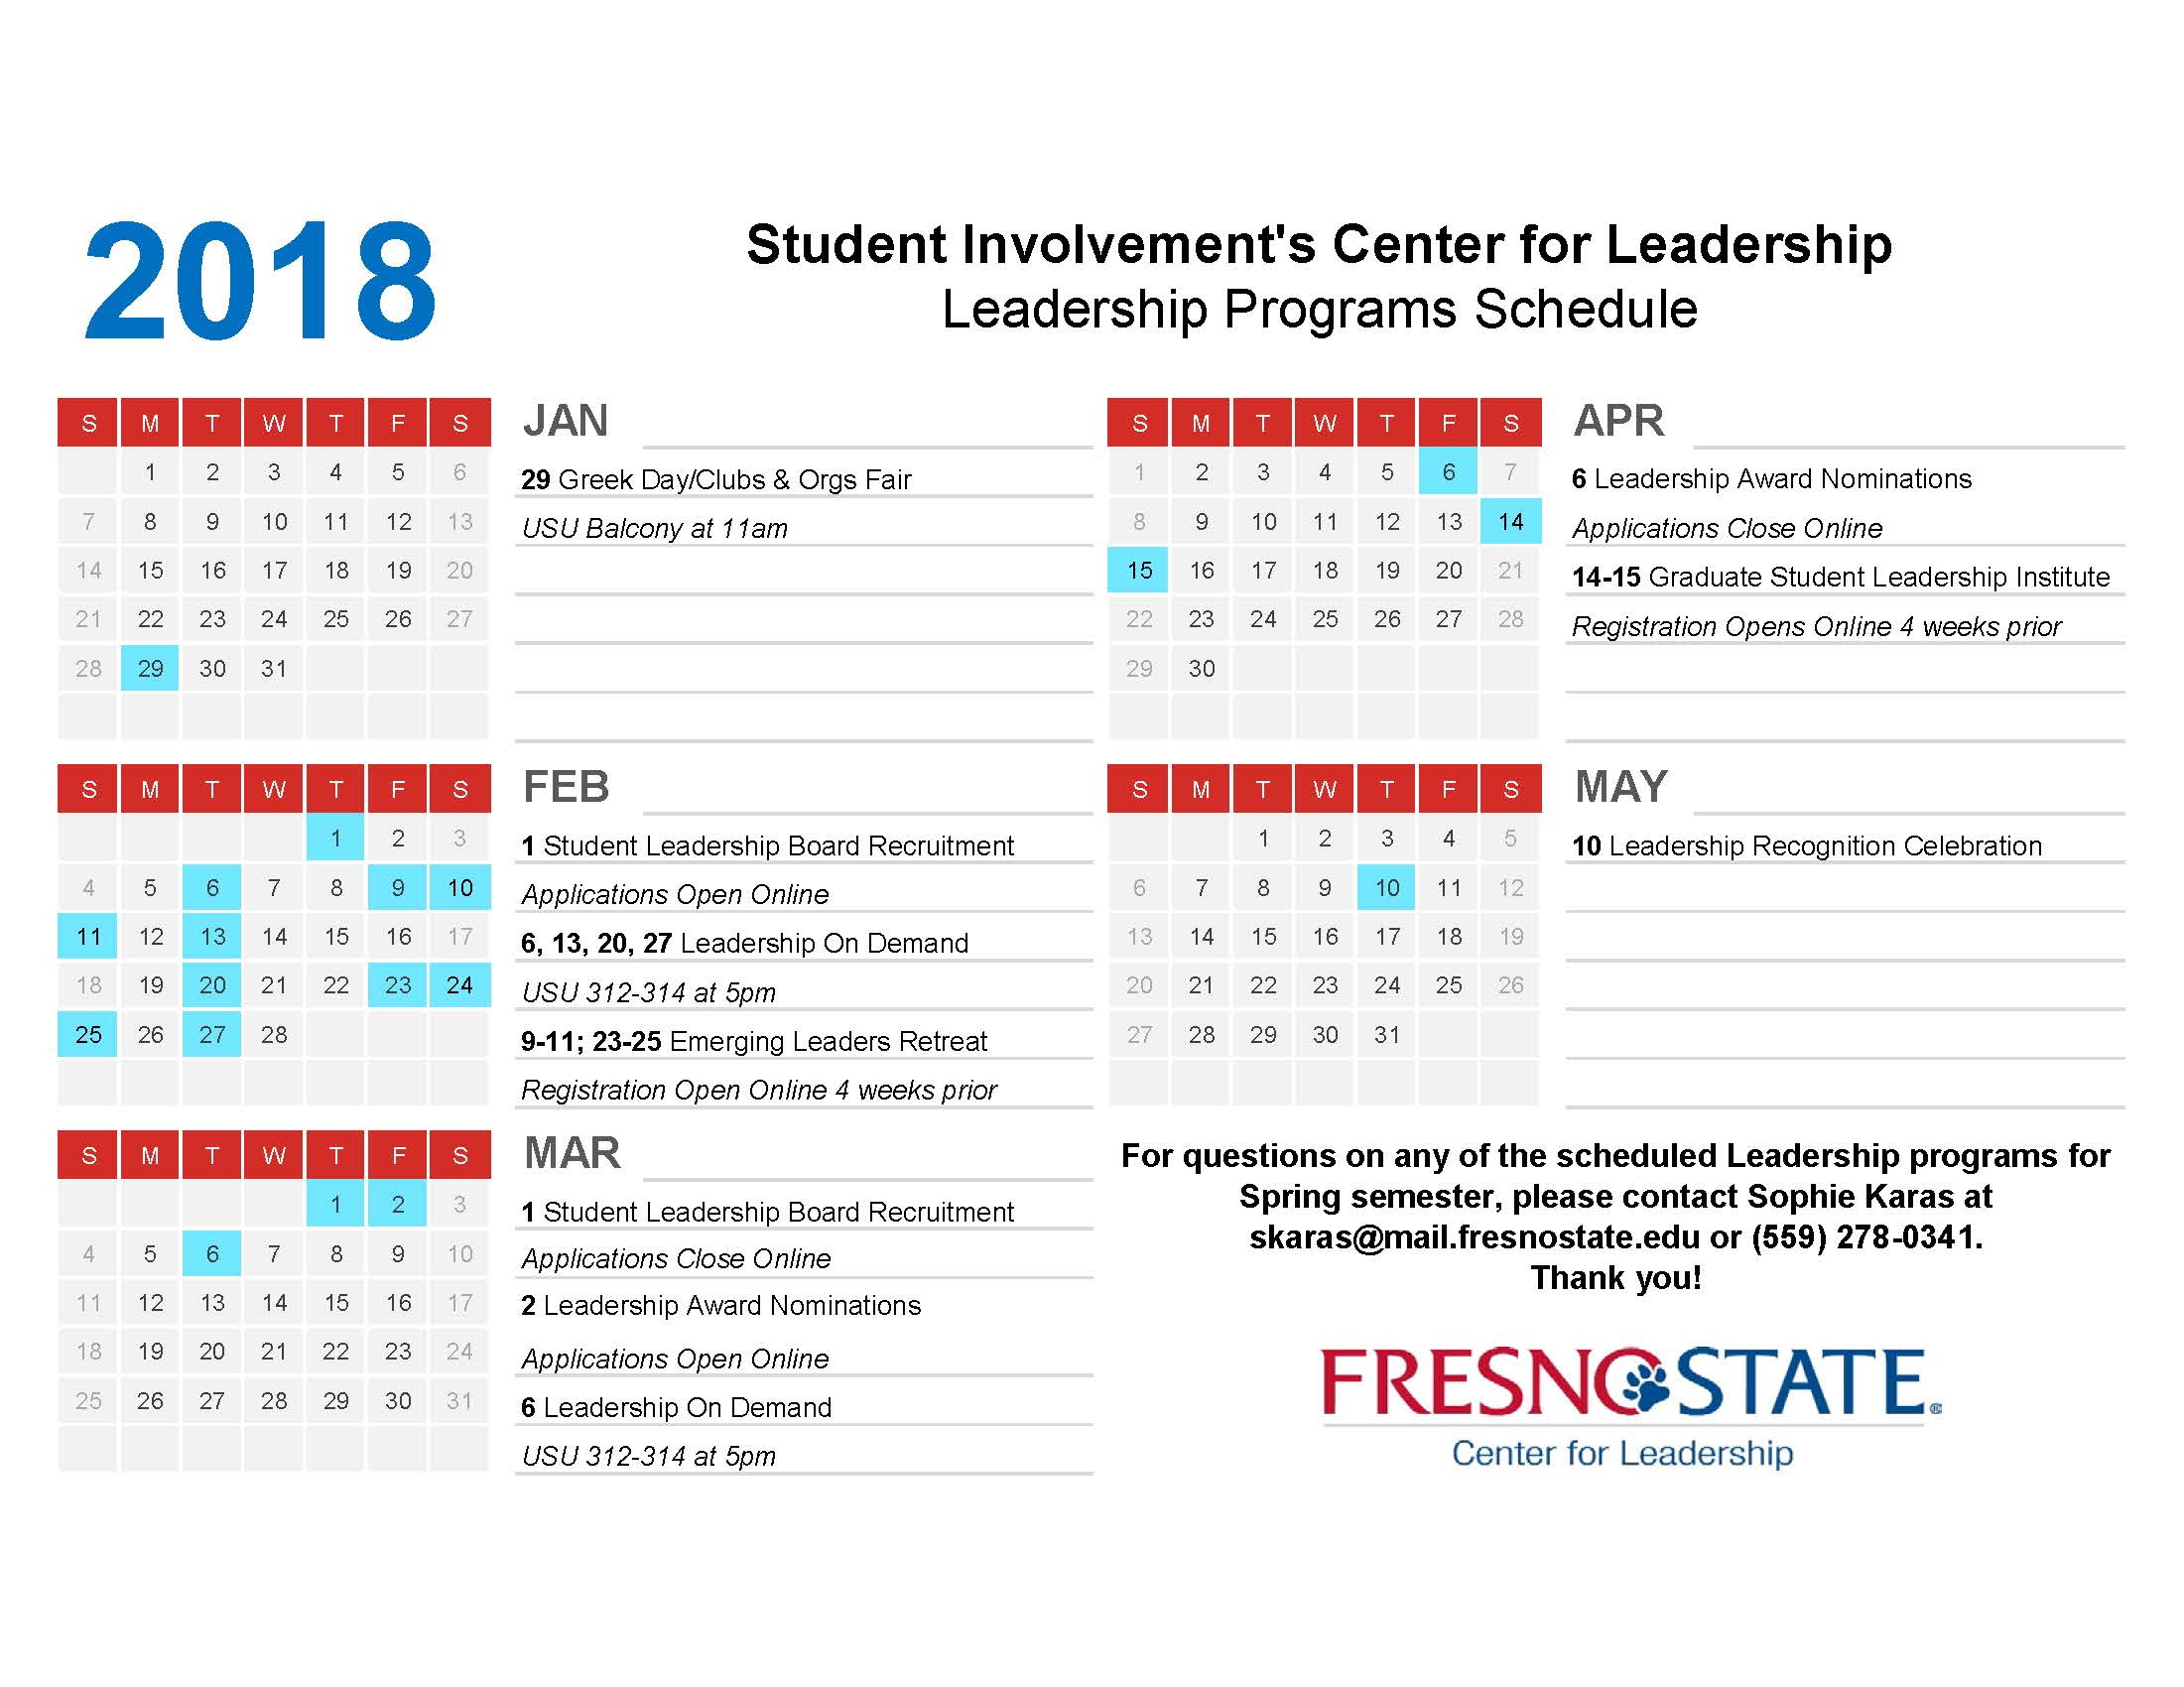 Fresno State Campus News Share student leadership opportunities